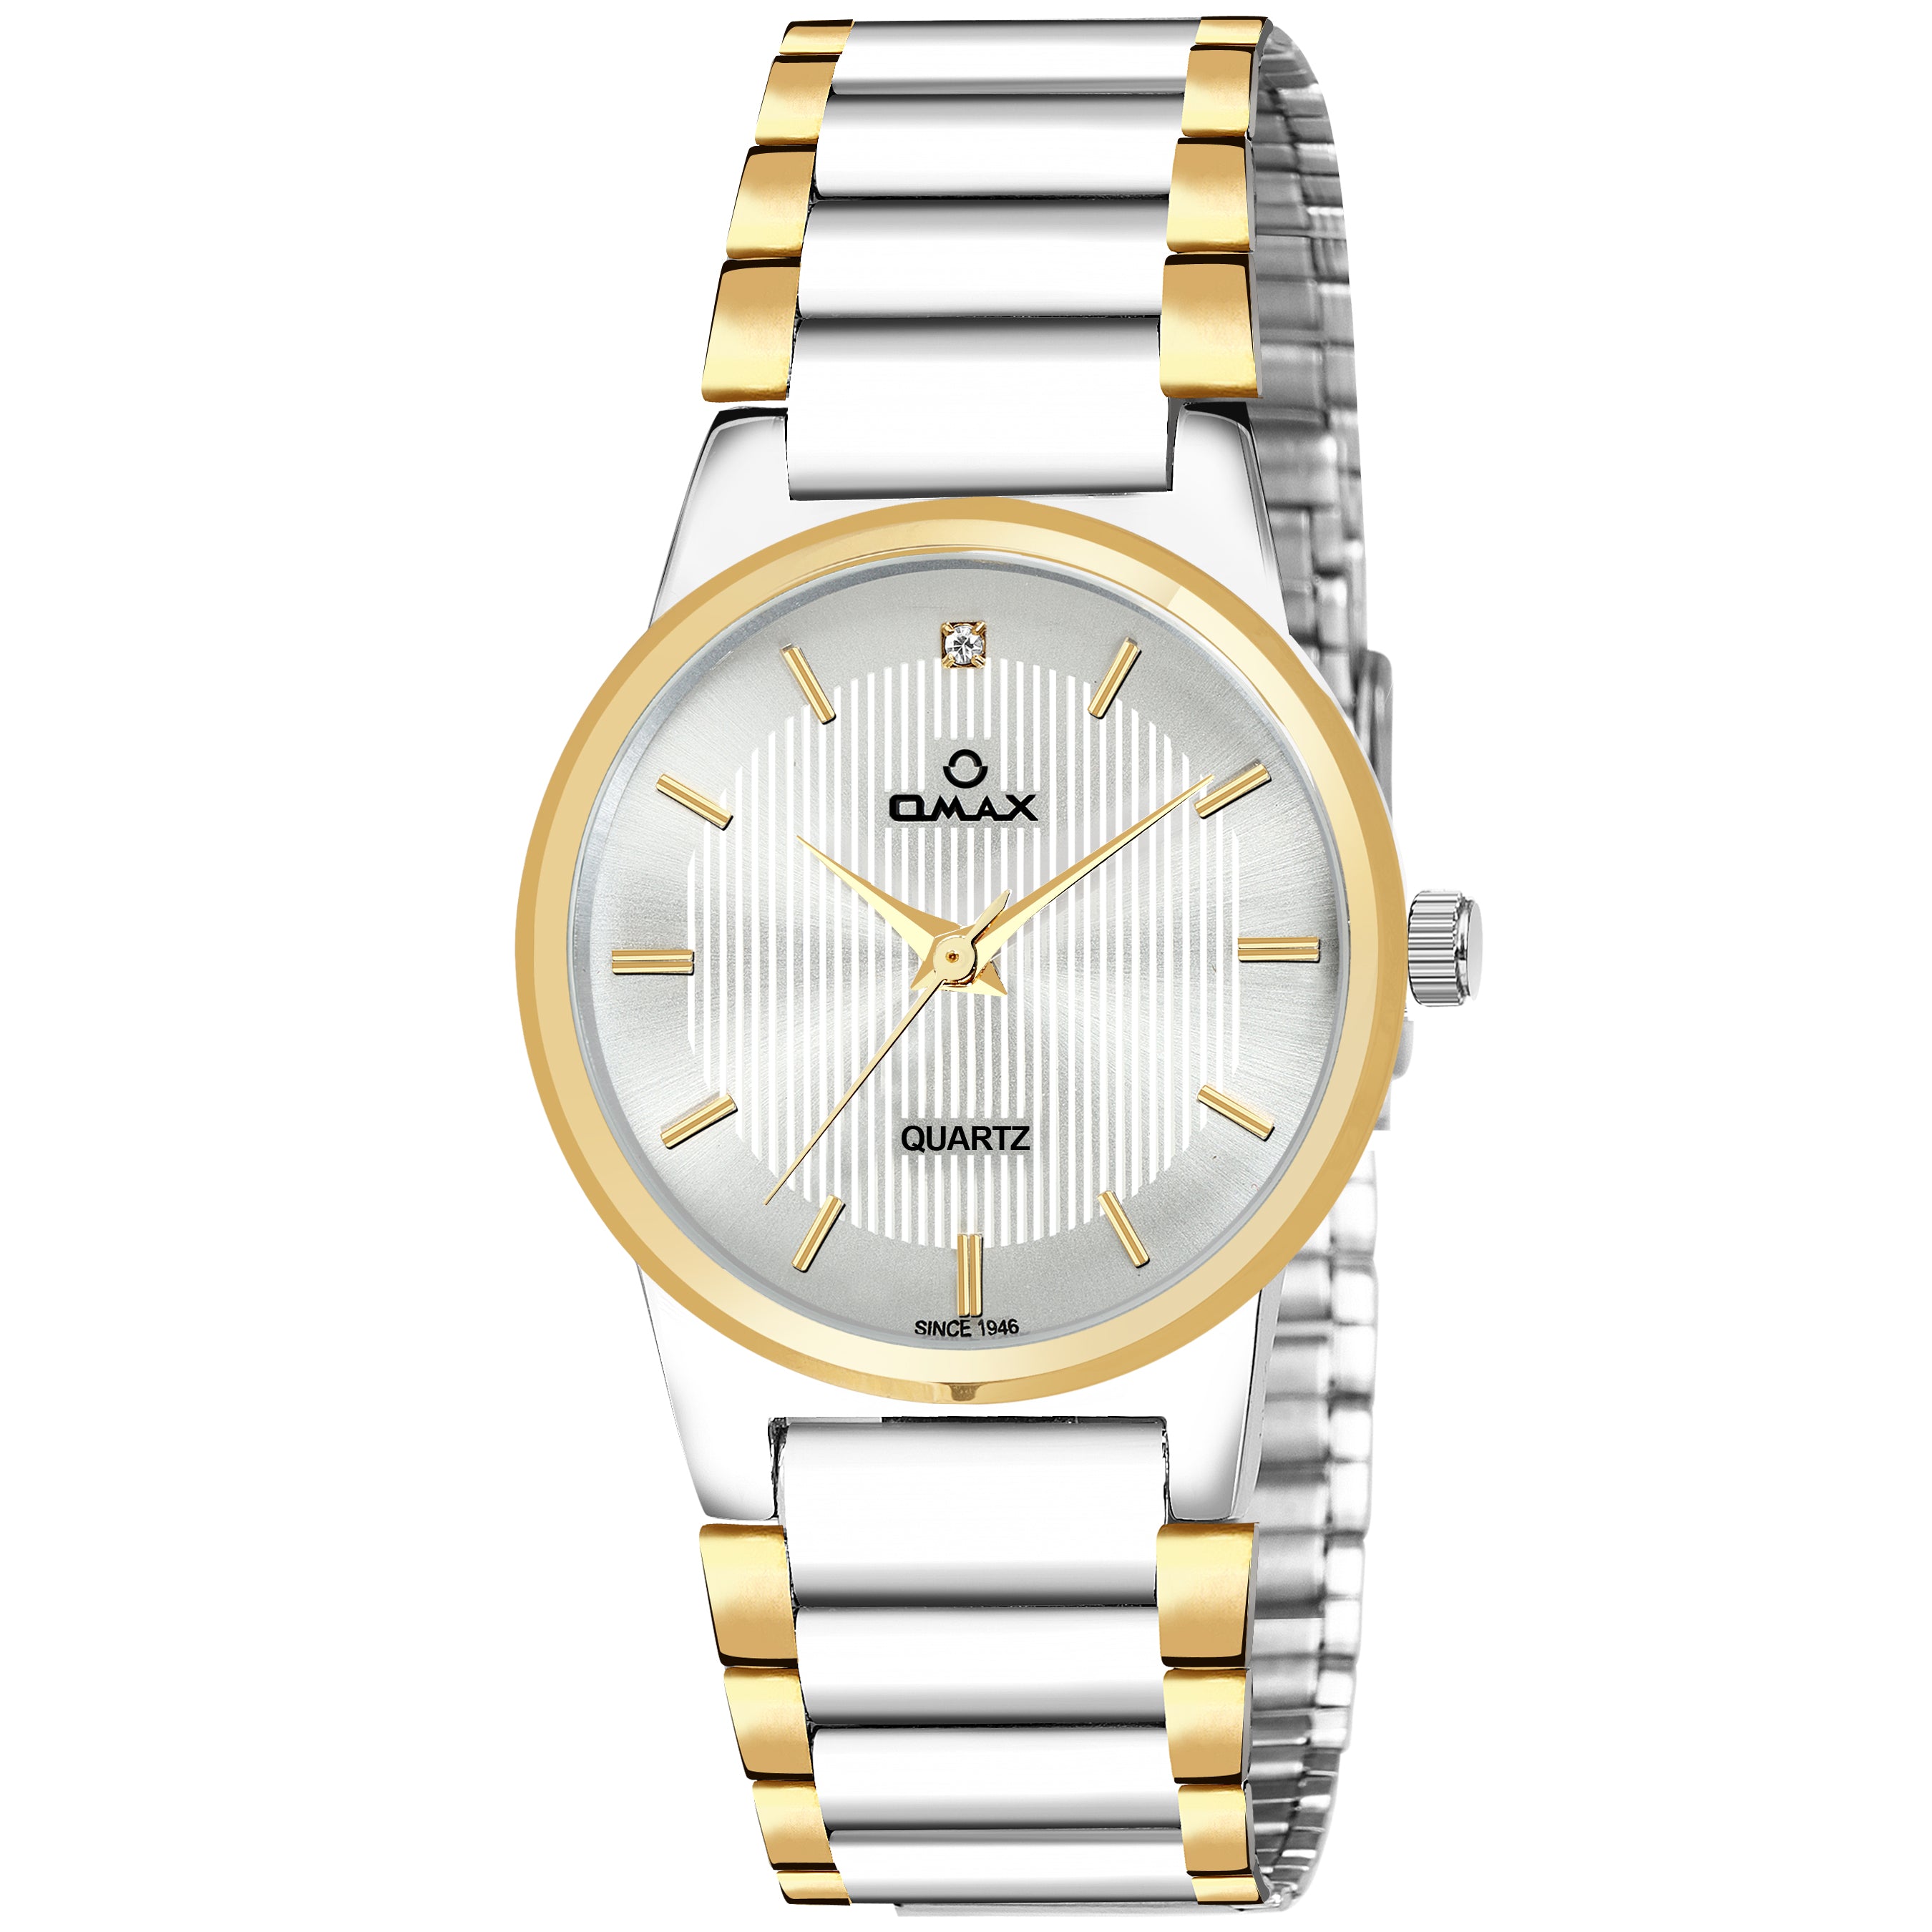 Omax Analog Dial Watch White LS319 in Noida at best price by Omax Watches  India Pvt Ltd - Justdial